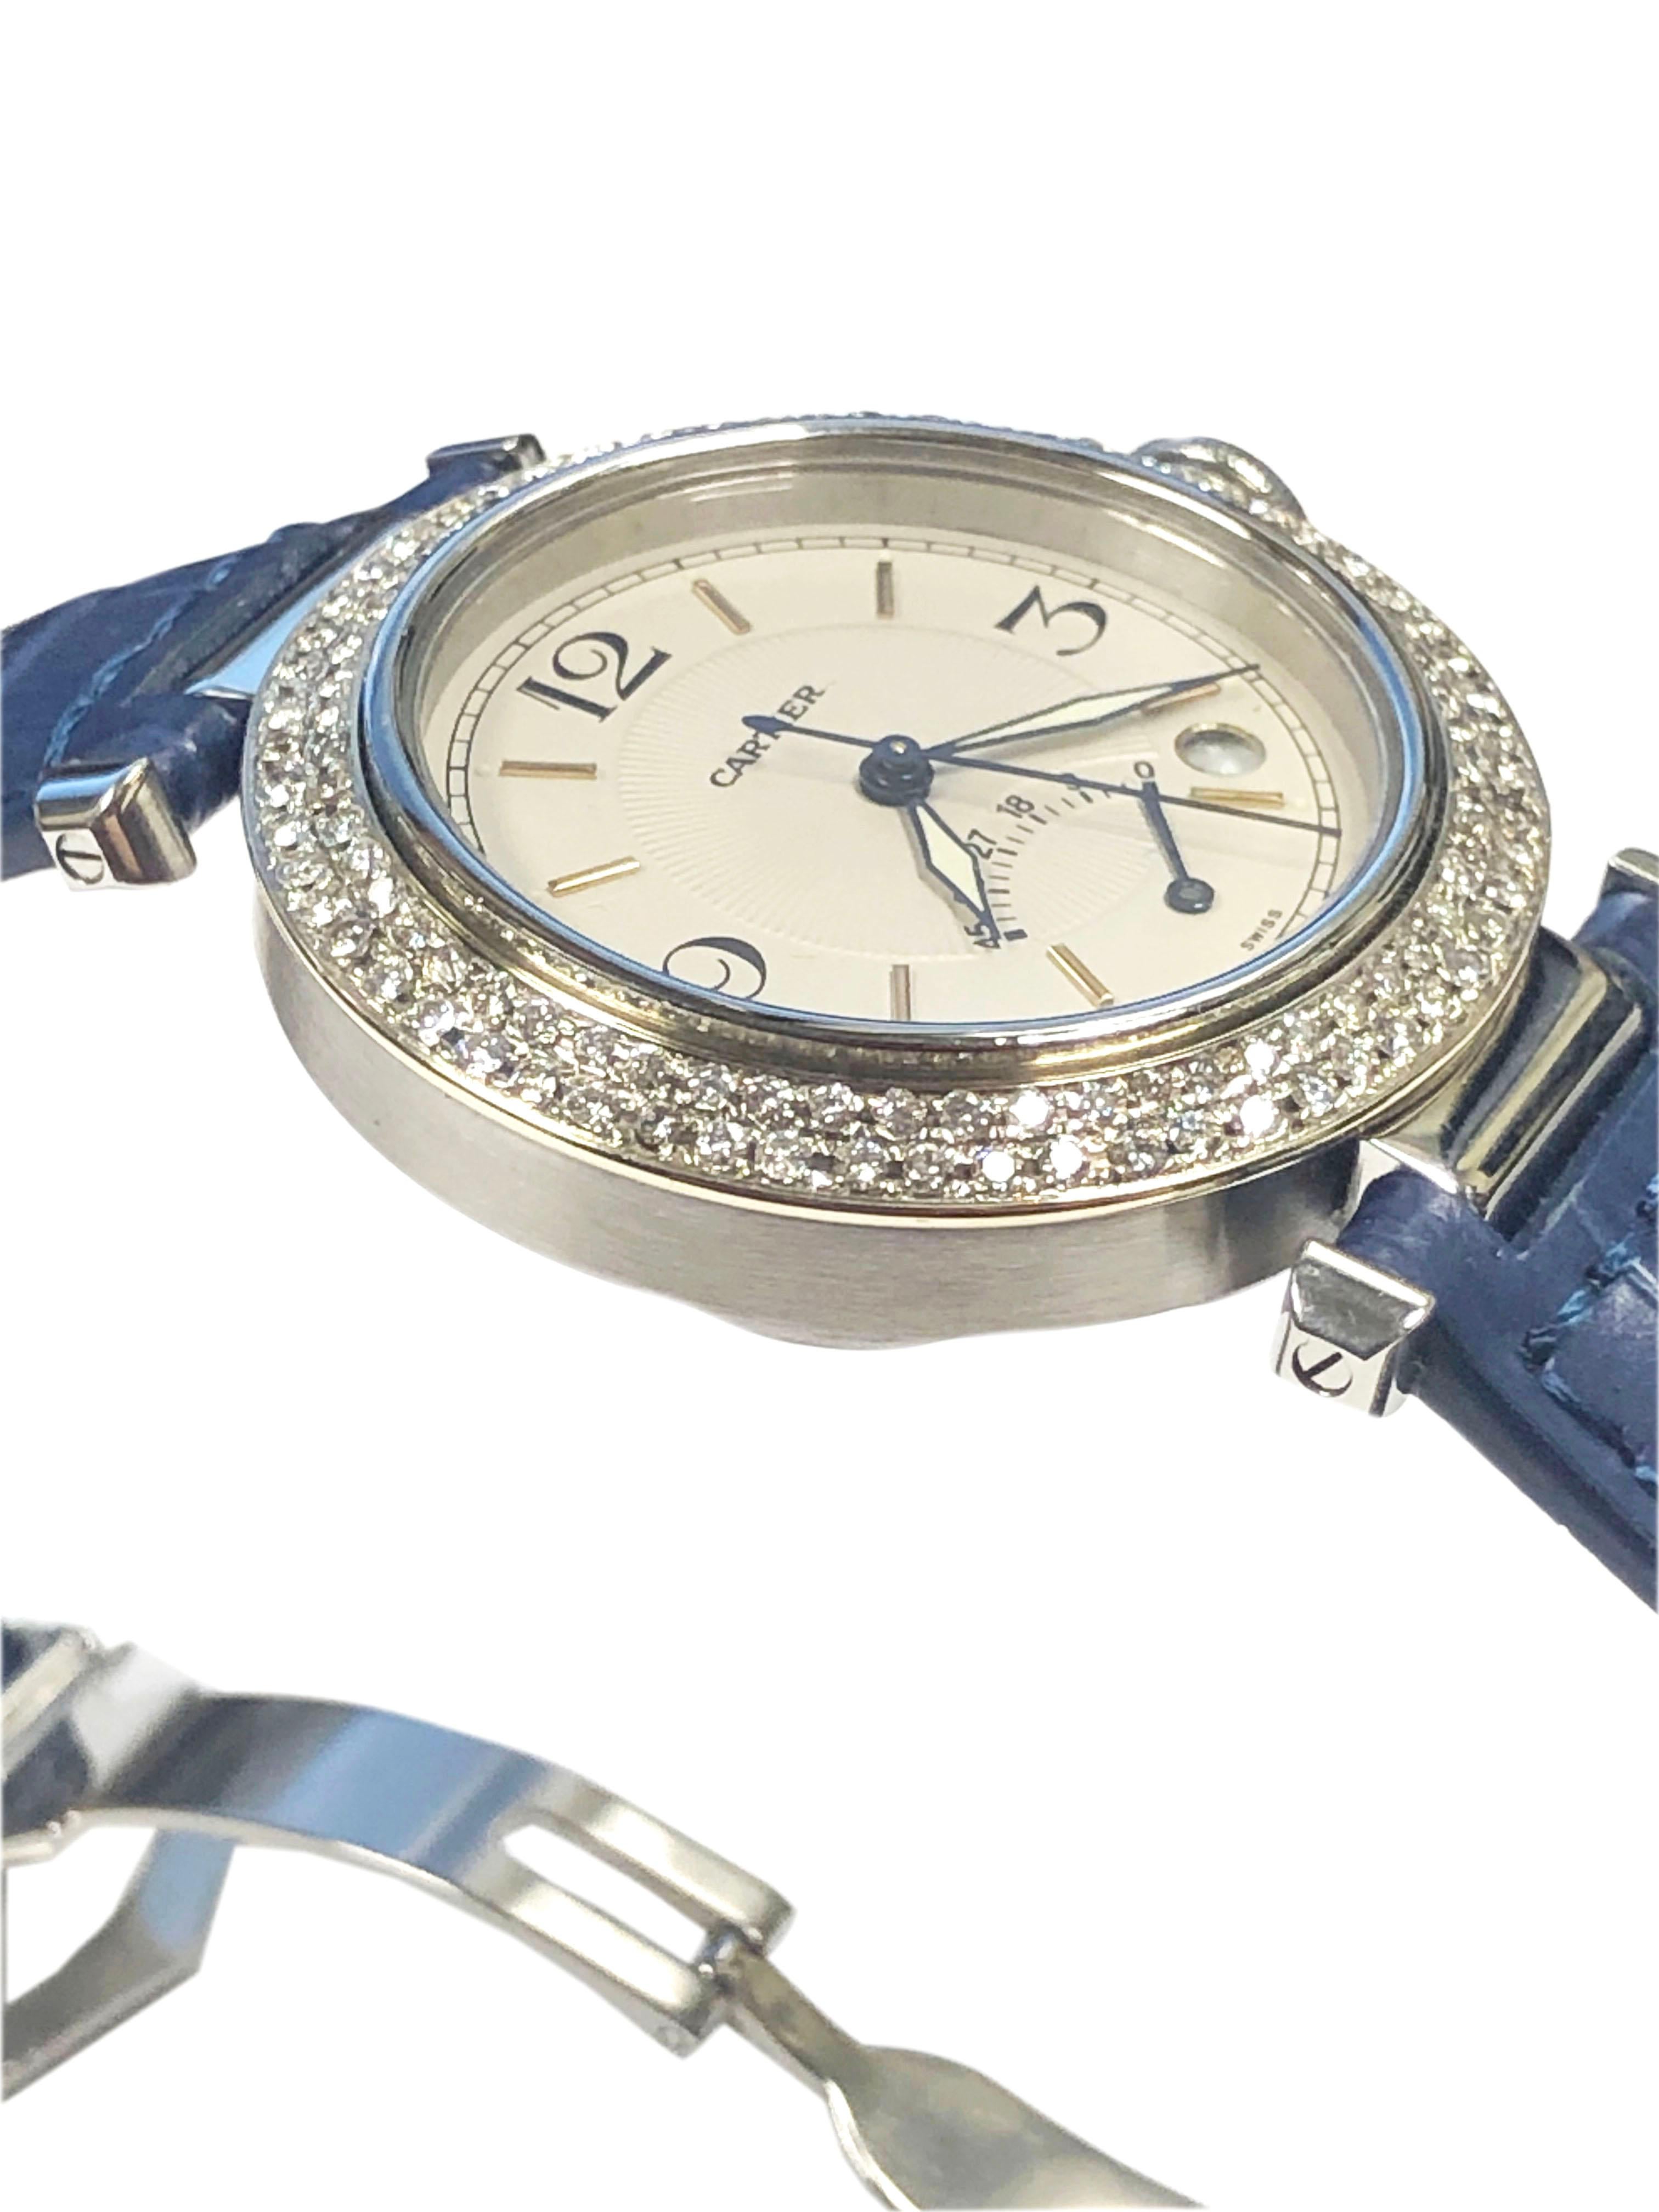 Circa 2000 Cartier Pasha Reference 1033 Wrist Watch, 38 M.M. 3 Piece Stainless Steel Water Resistant case, with after factory high quality Double row Diamond Bezel, approximately 2 Carats. Screw Down Water Proof Sapphire set Crown. Automatic Self